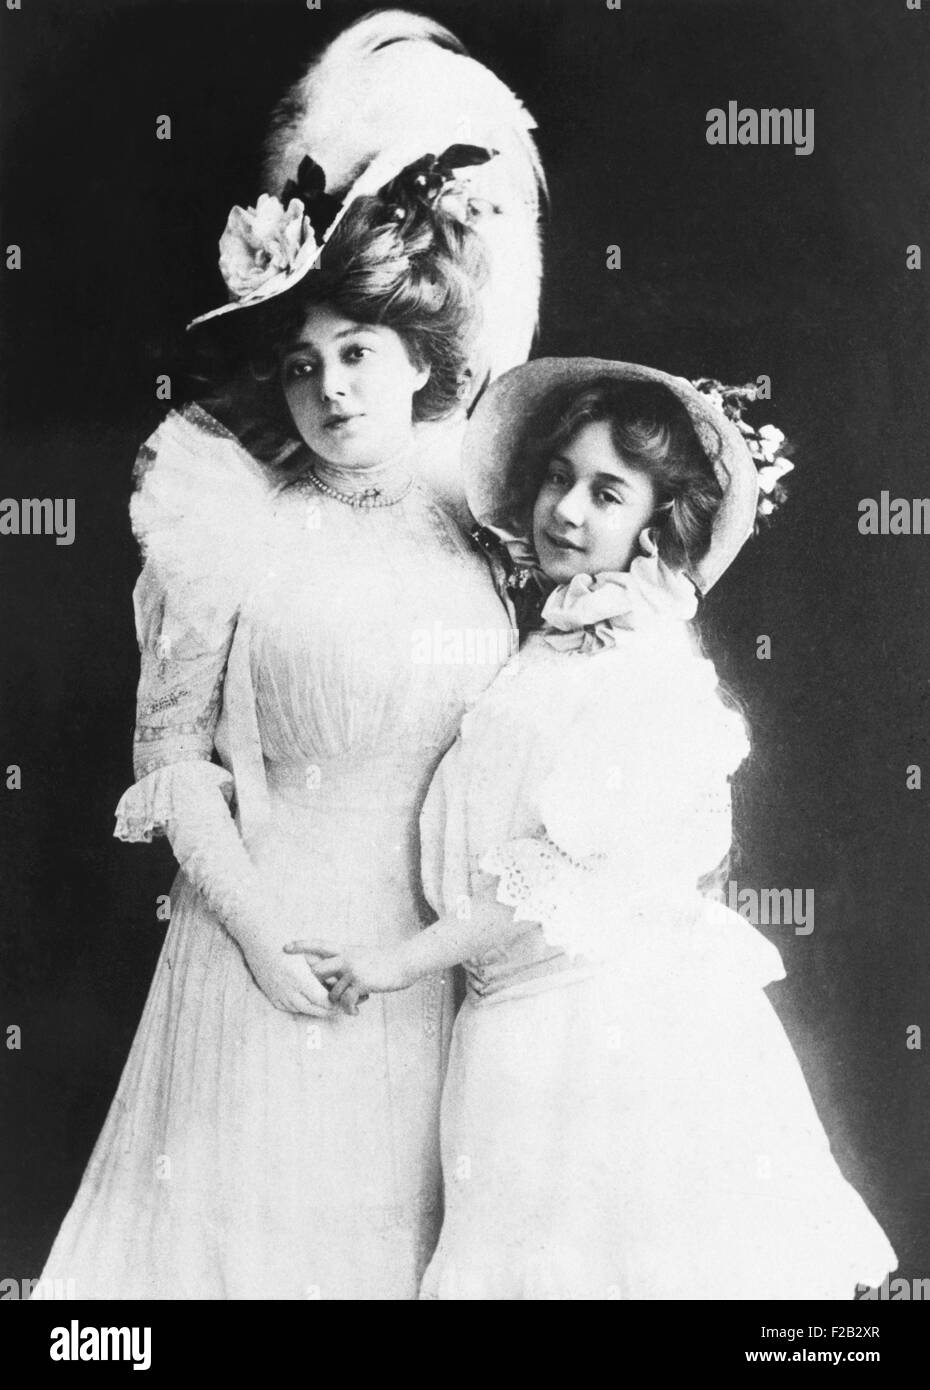 Famous Ziegfeld star Anna Held with her daughter Liane Carrera, ca. 1907. Liane was born in 1895, during Held's marriage to Uruguayan playboy Maximo Carrera. Liane became an actress and producer, and was sometimes billed as Anna Held, Jr. (CSU 2015 7 303) Stock Photo